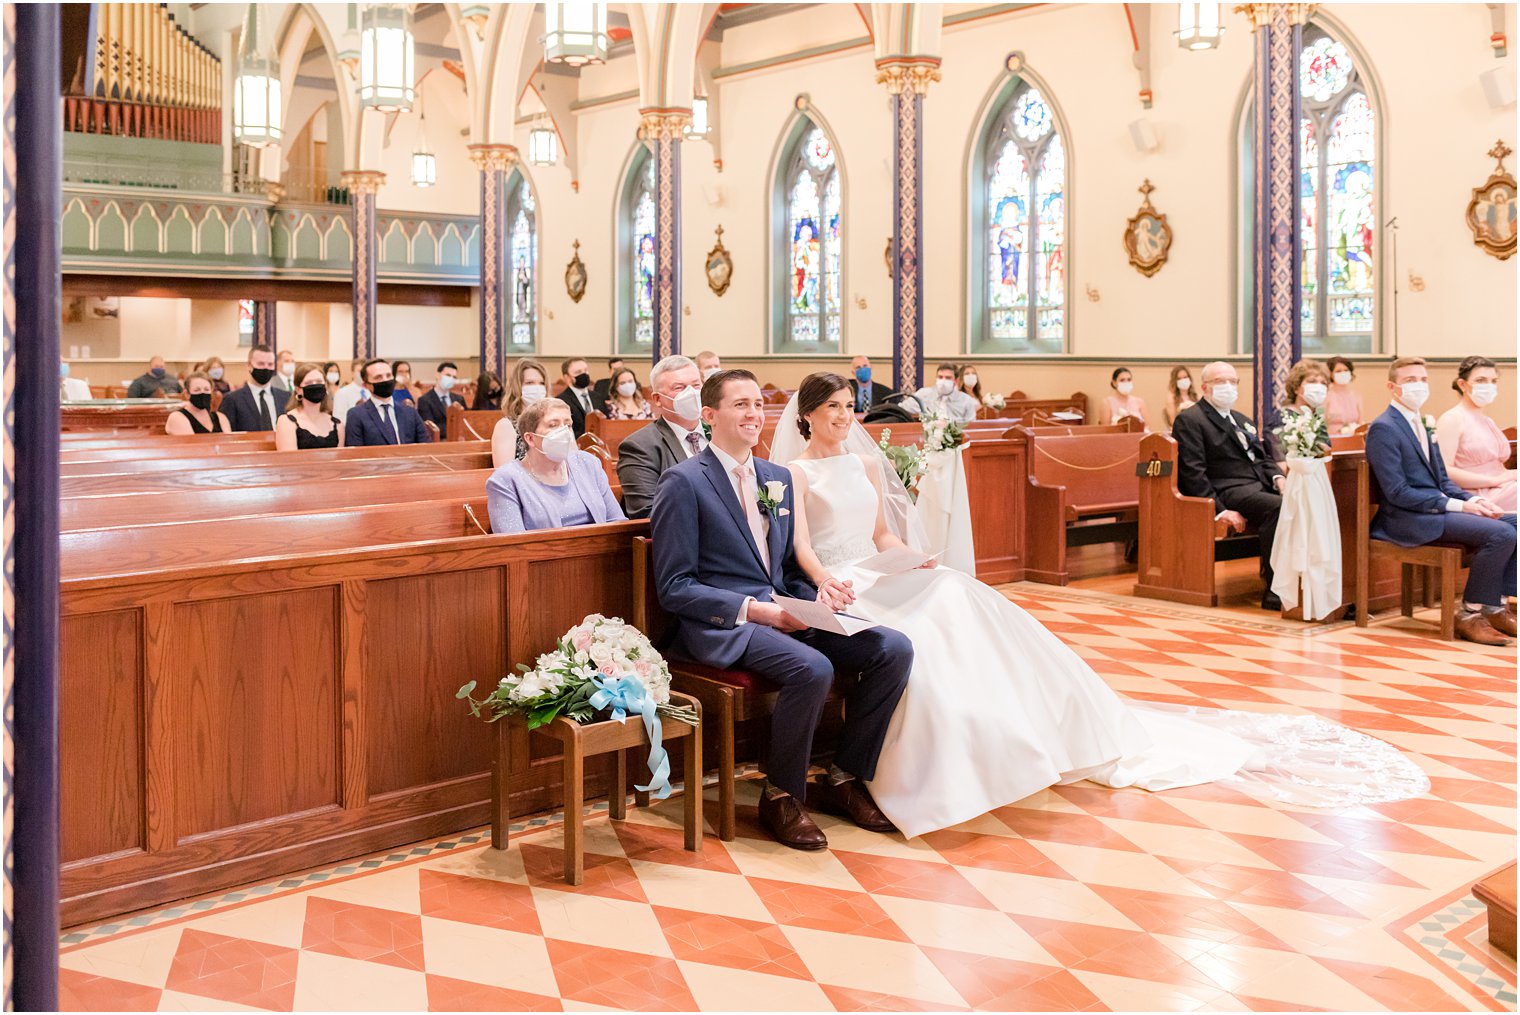 Wedding ceremony at Church of the Assumption in Morristown, NJ